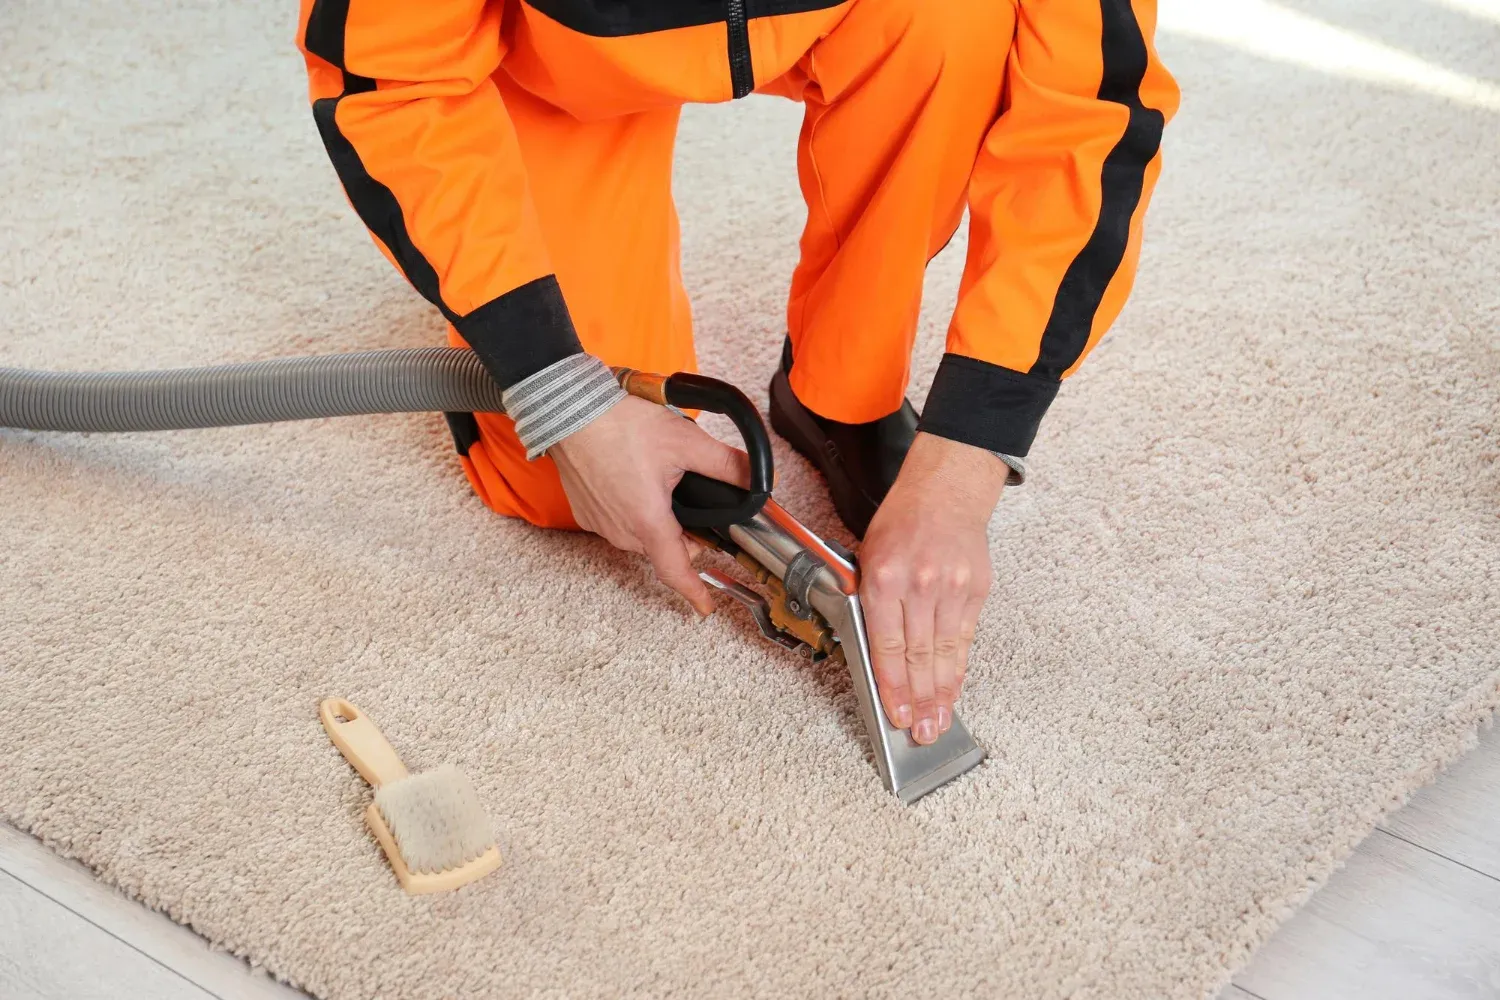 Professional Area Rug Cleaning In Coquitlam, BC